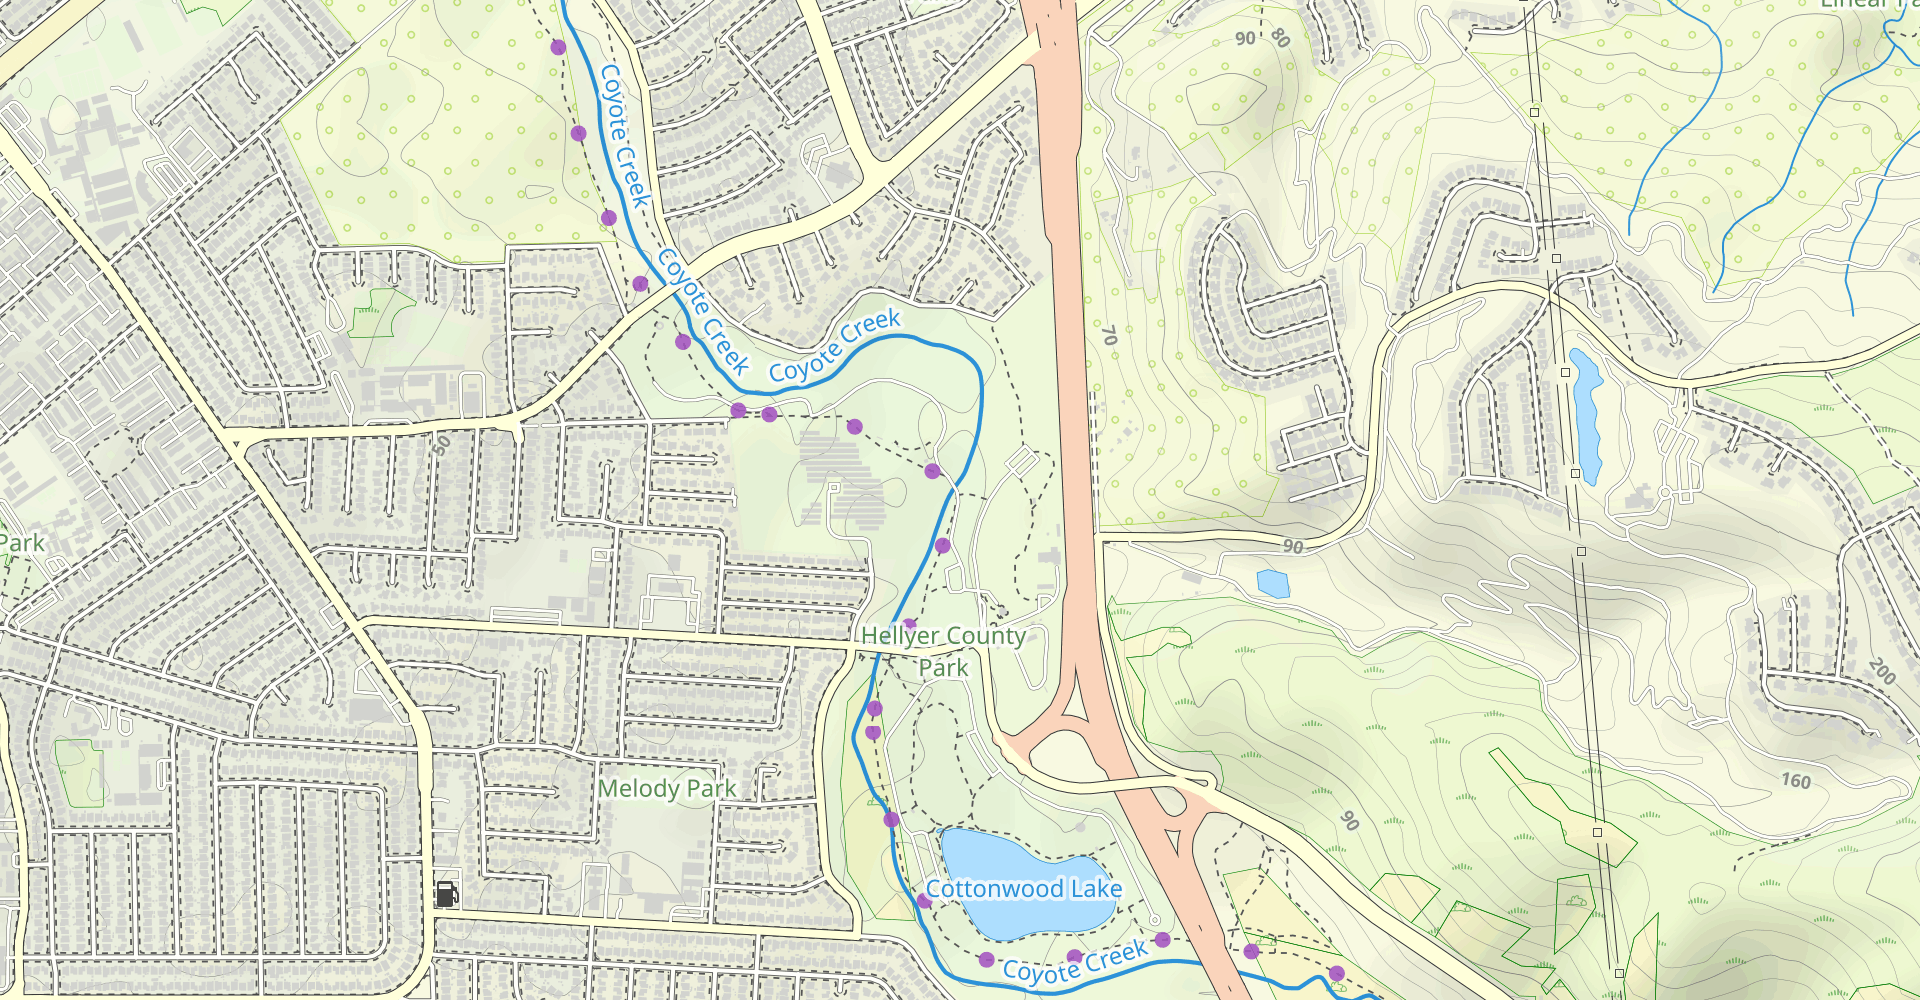 Coyote Creek Parkway and Hellyer County Park